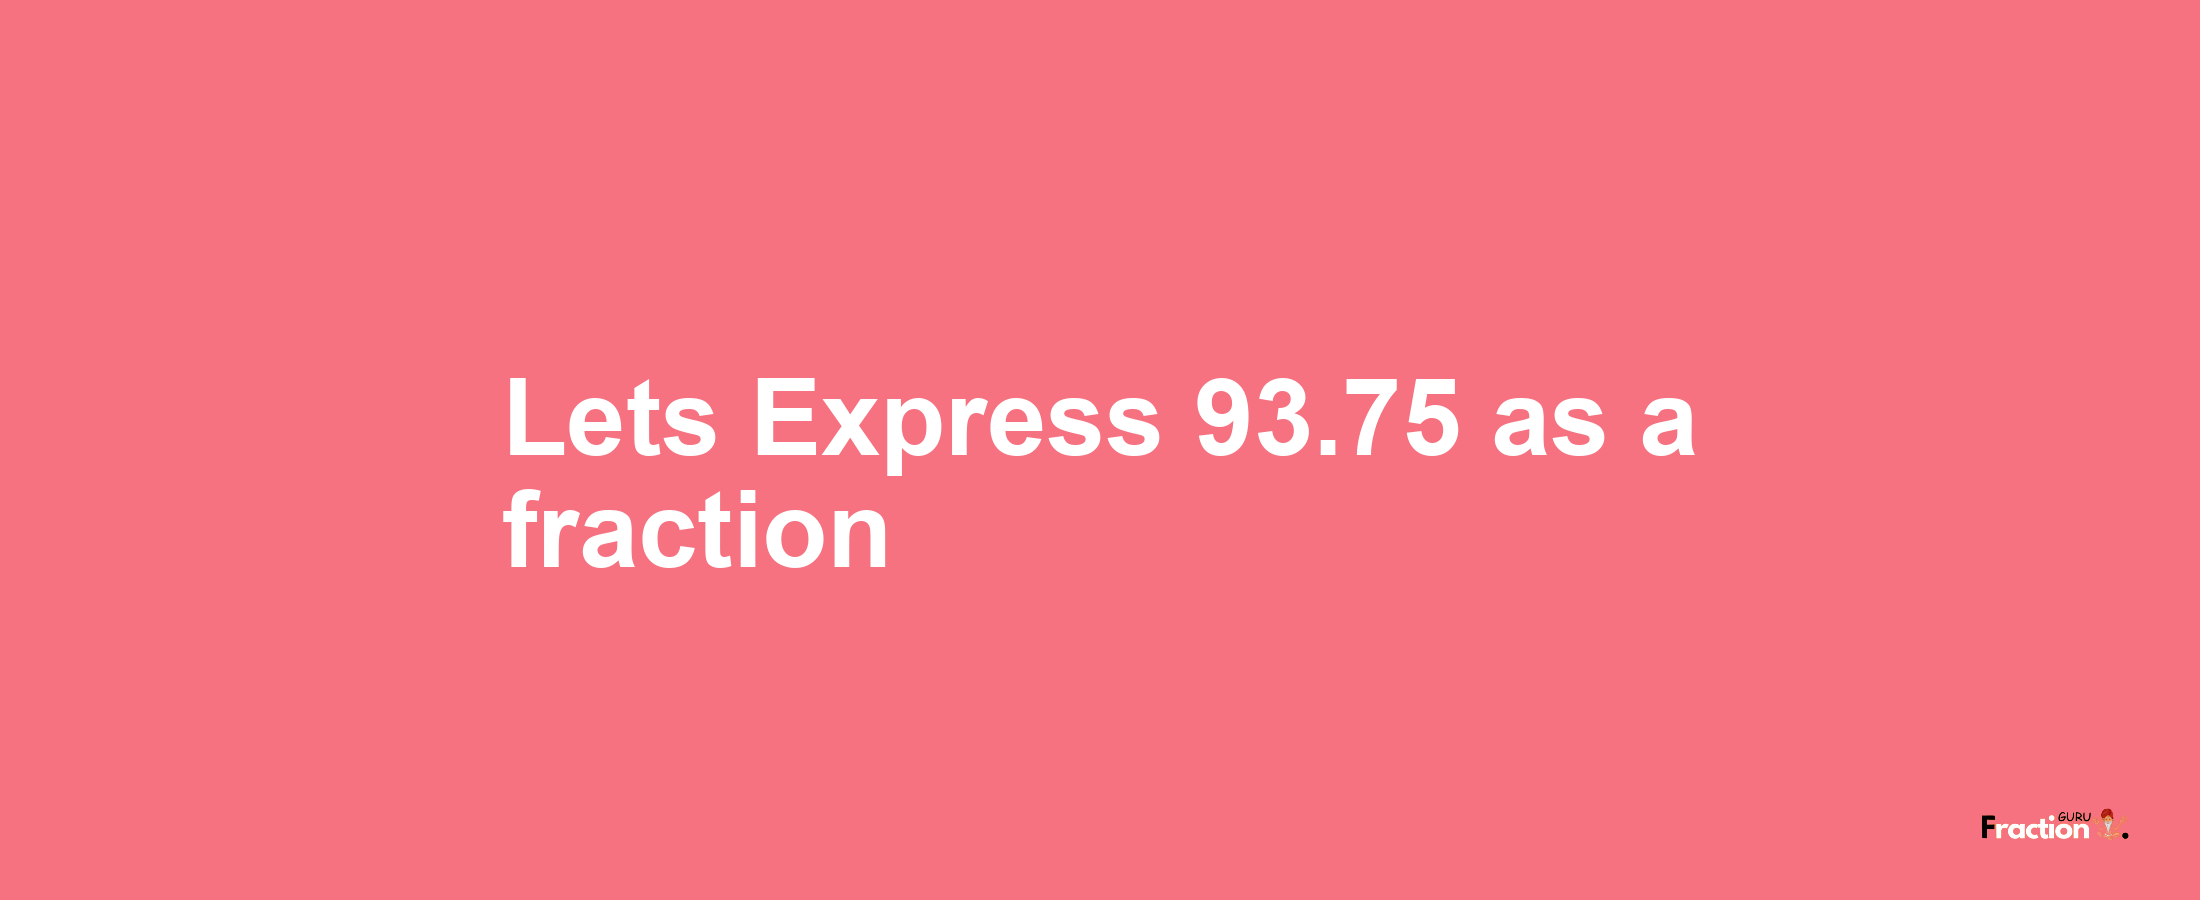 Lets Express 93.75 as afraction